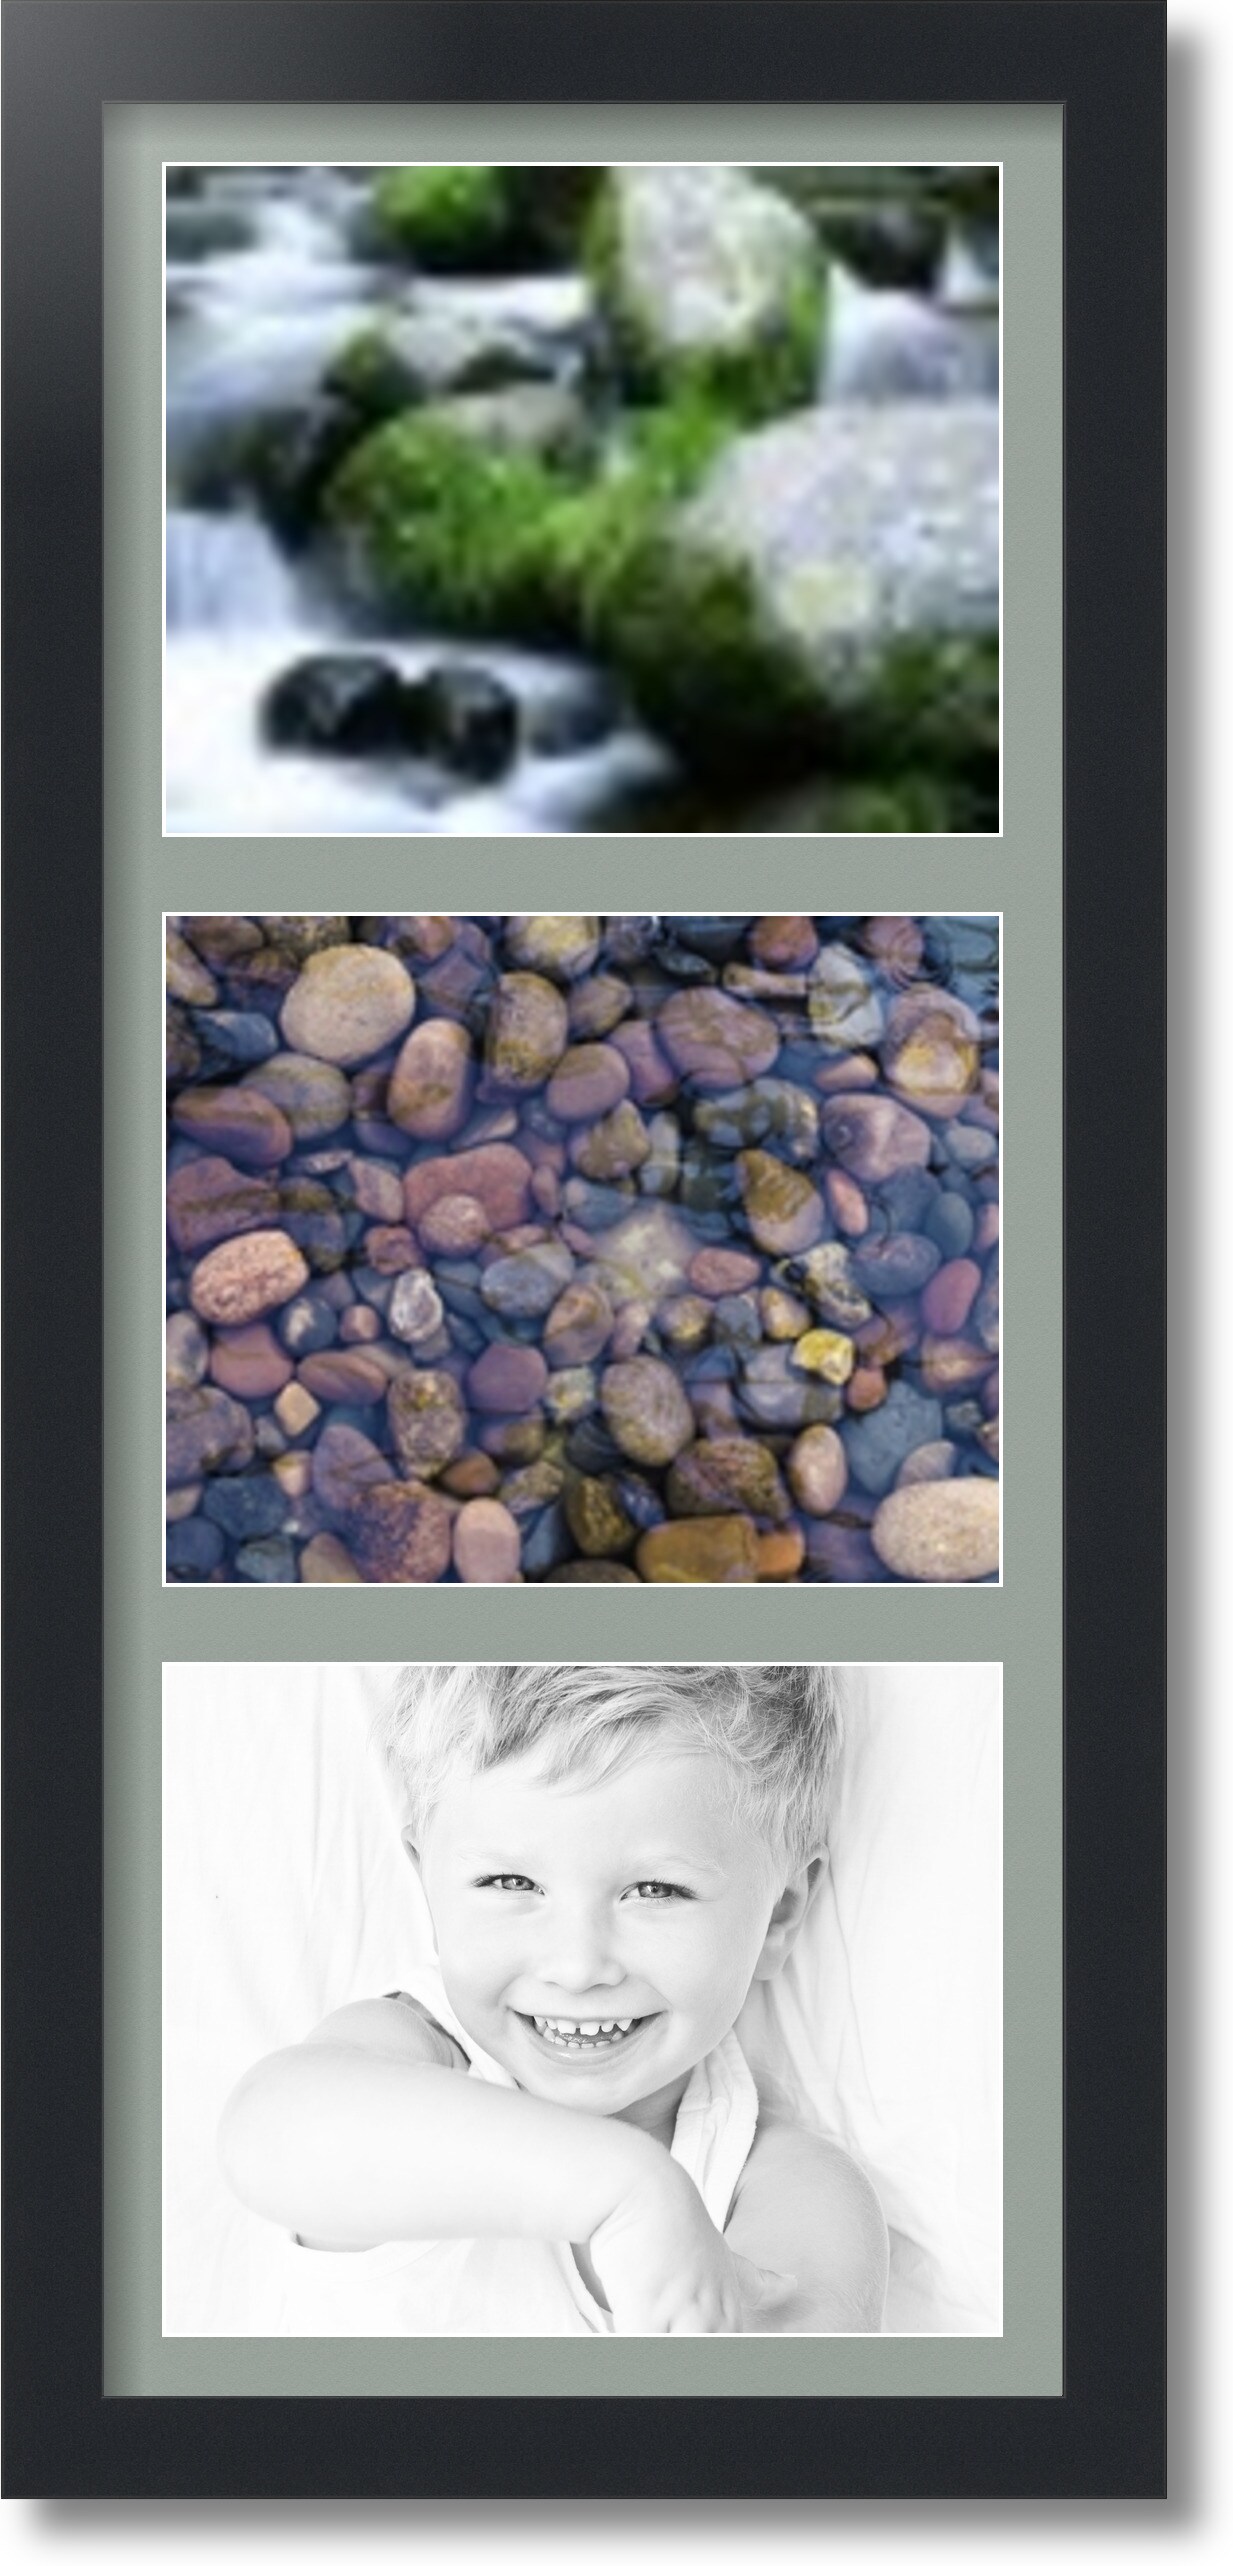 ArtToFrames Collage Photo Picture Frame with 3 - 8x10 inch Openings, Framed in Black with Over 62 Mat Color Options and Plexi Glass (CSM-3926-2156)